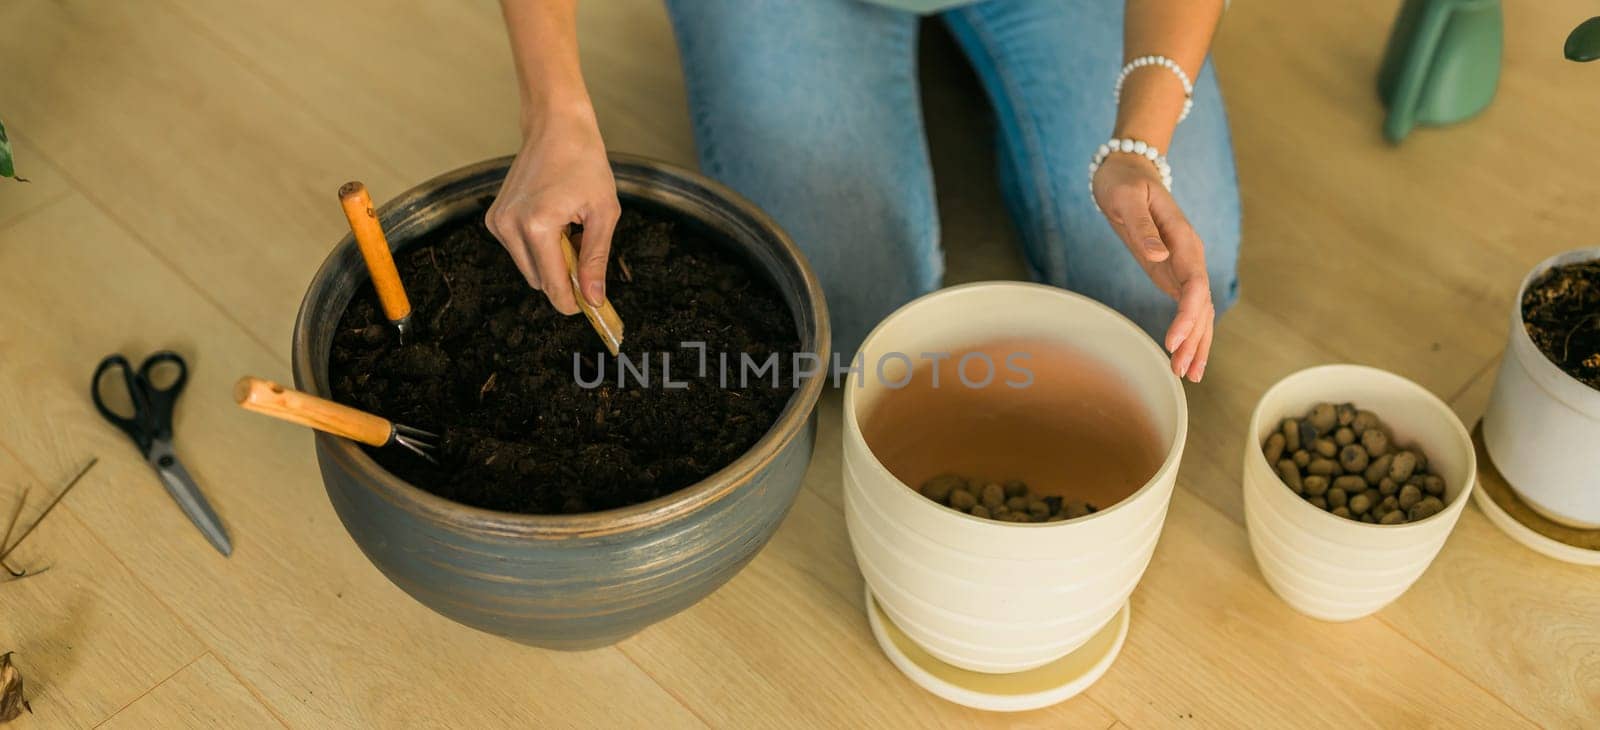 Woman transplanting green plant into new pot. Houseplant and home gardening